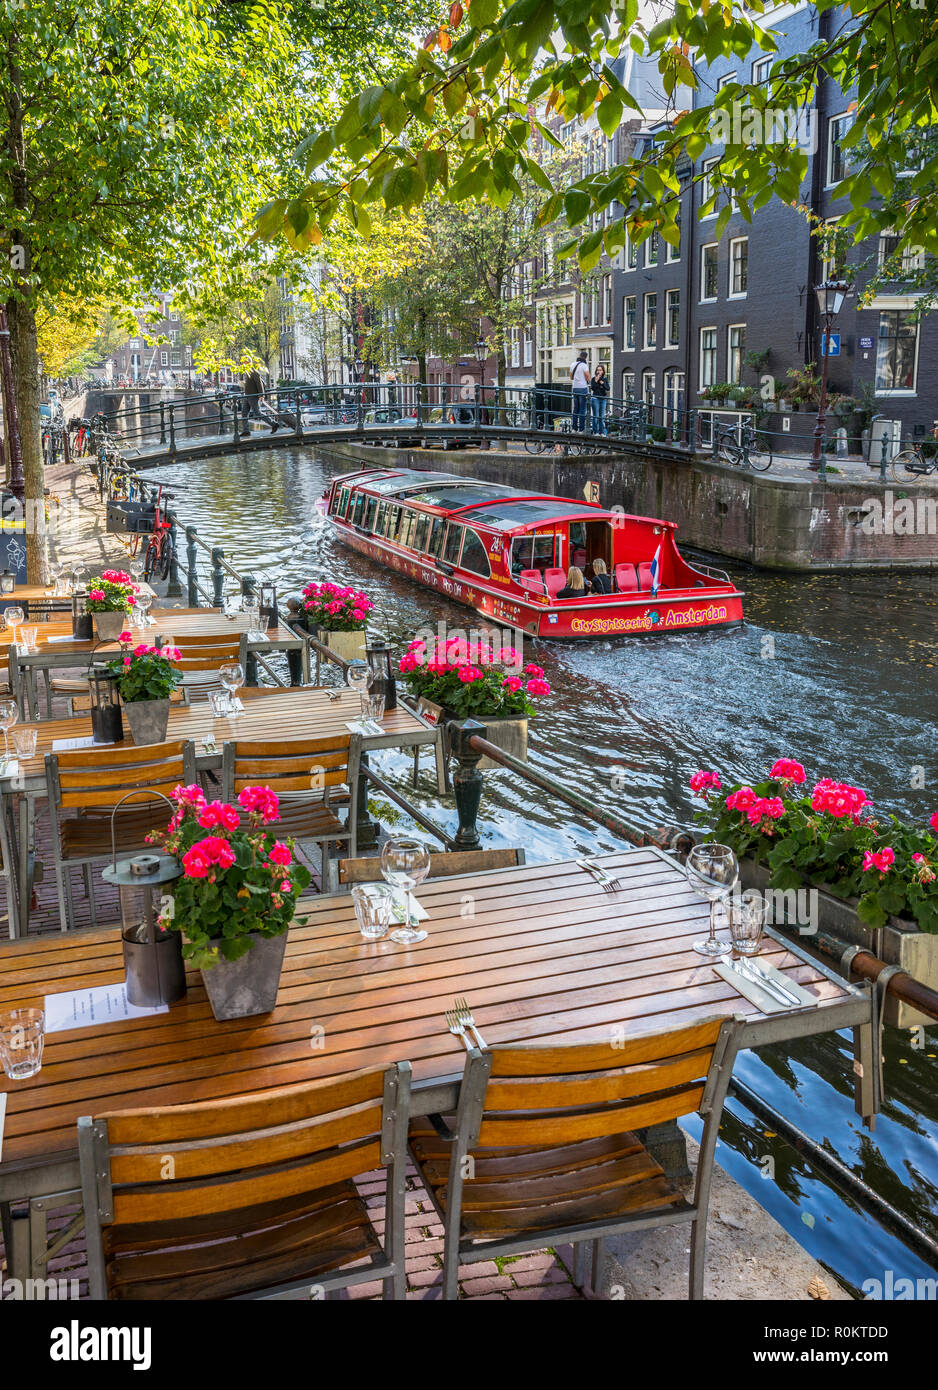 Amsterdam restaurant, tables set for lunch with flowers Stock Photo